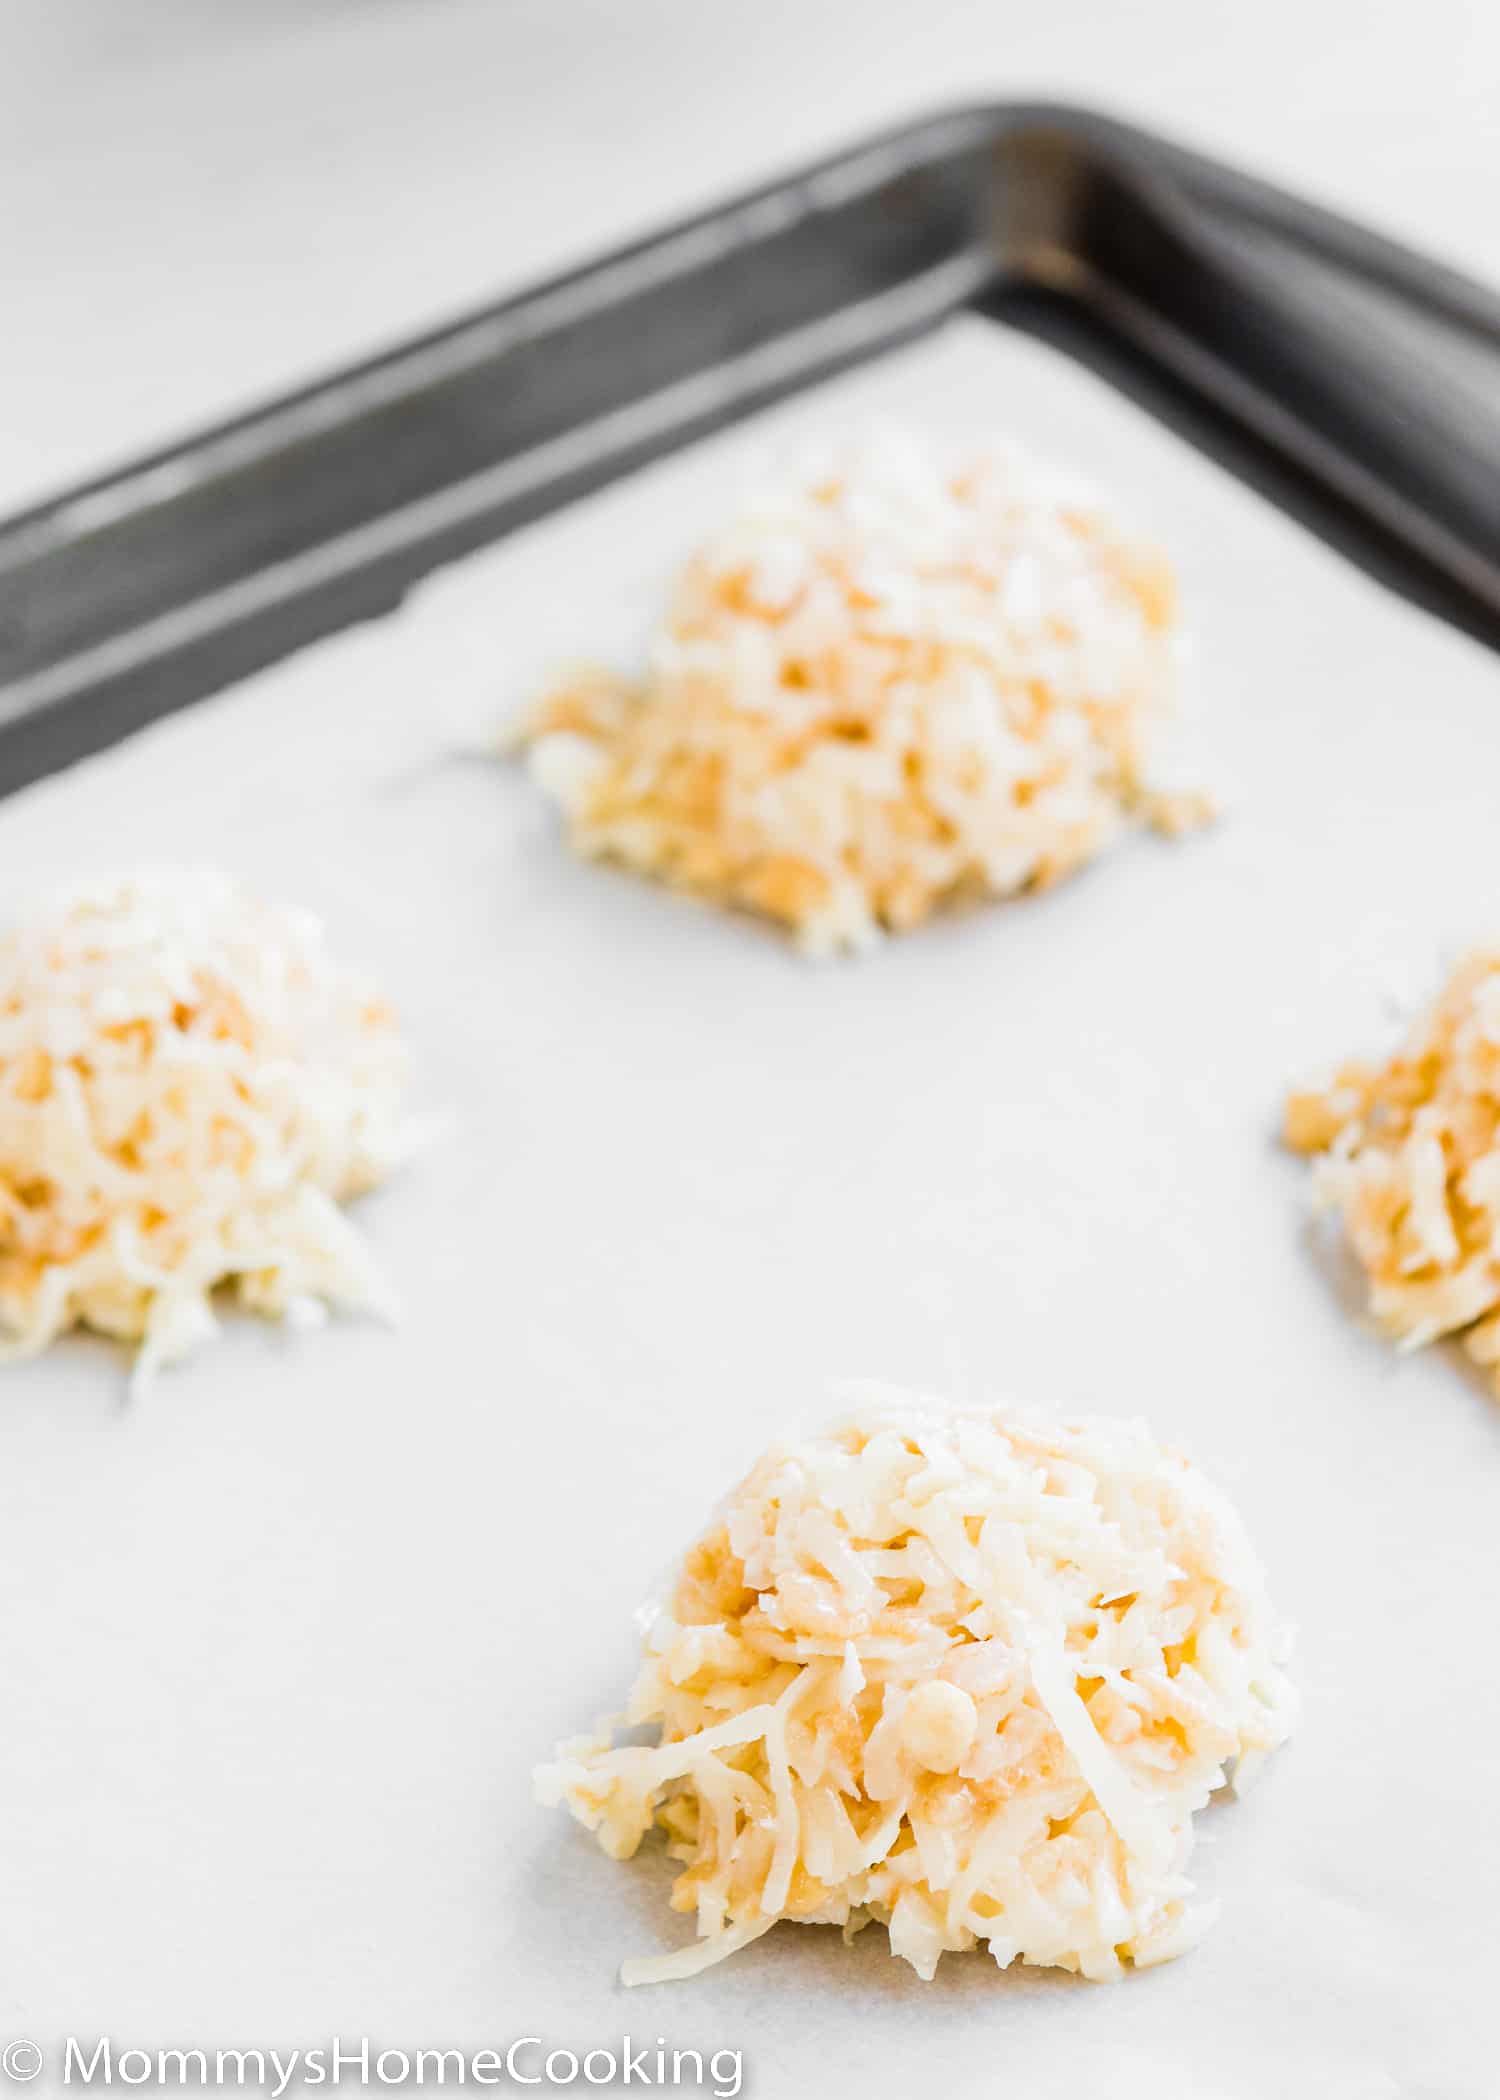 unbaked Eggless Coconut Macaroons over a baking tray.